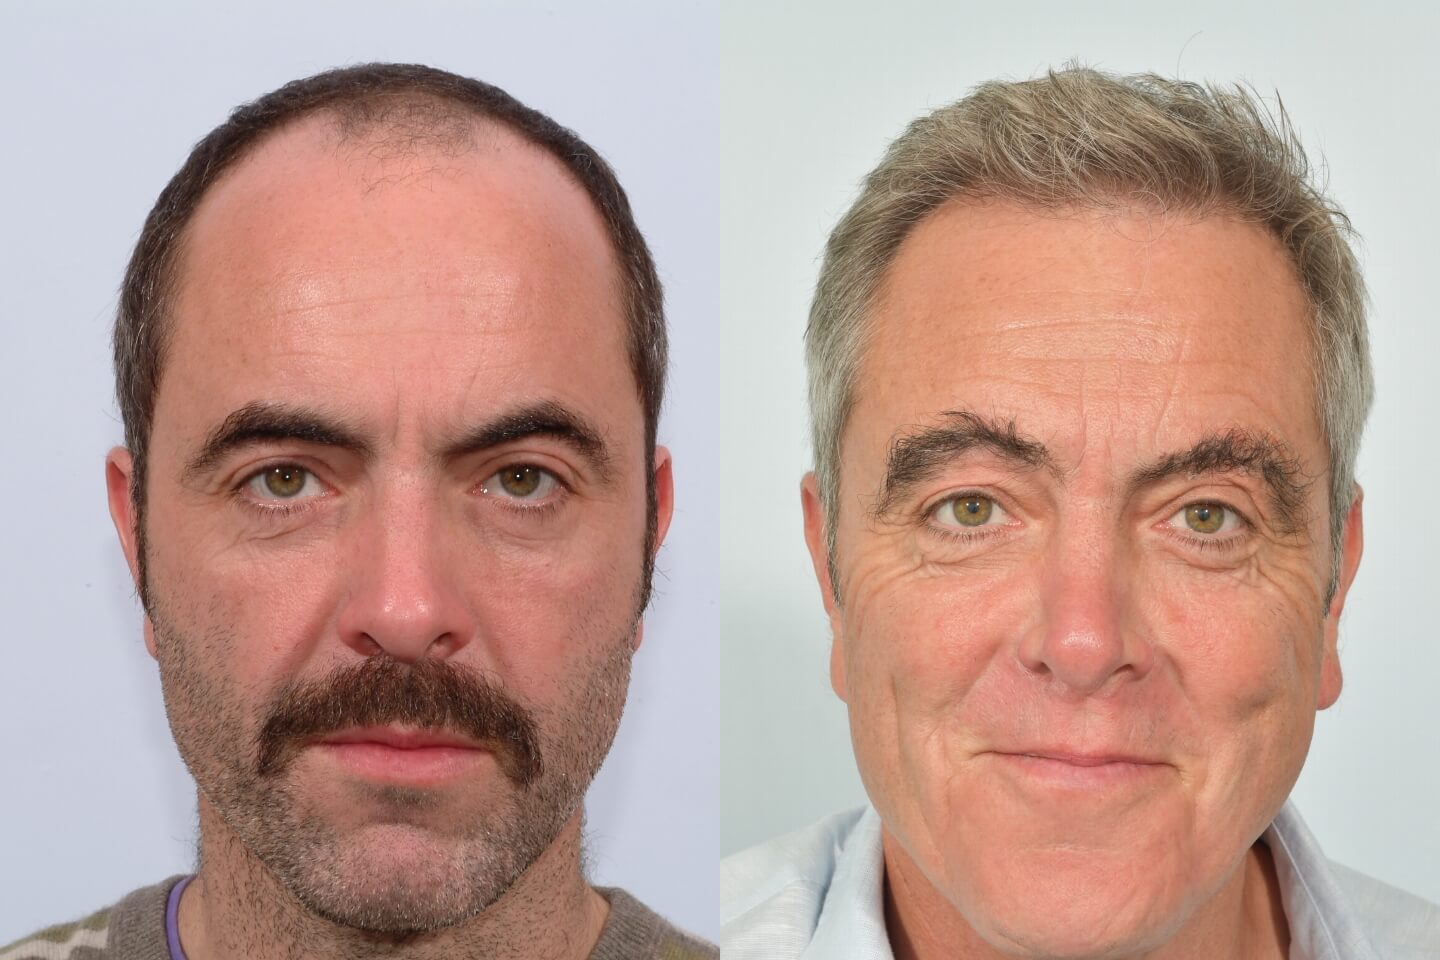 Hair Transplant Clinic UK - Hair Replacement Surgery - HRBR